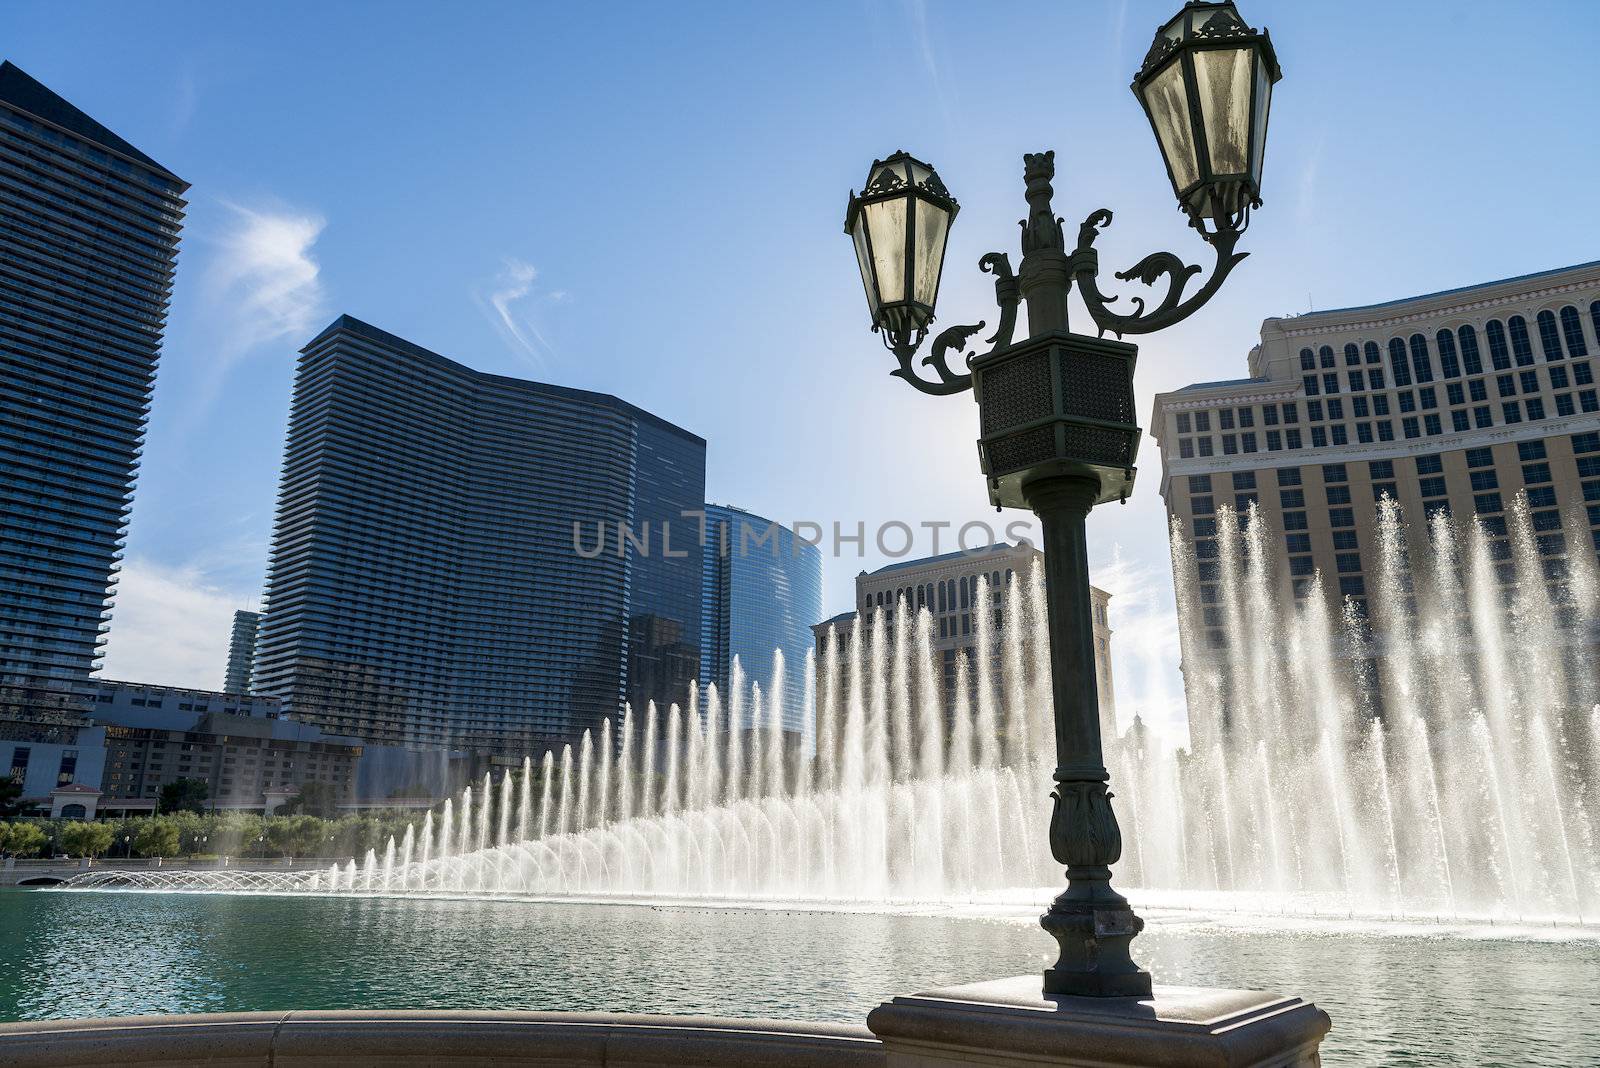 Misical show of fountains in Las Vegas at sunset